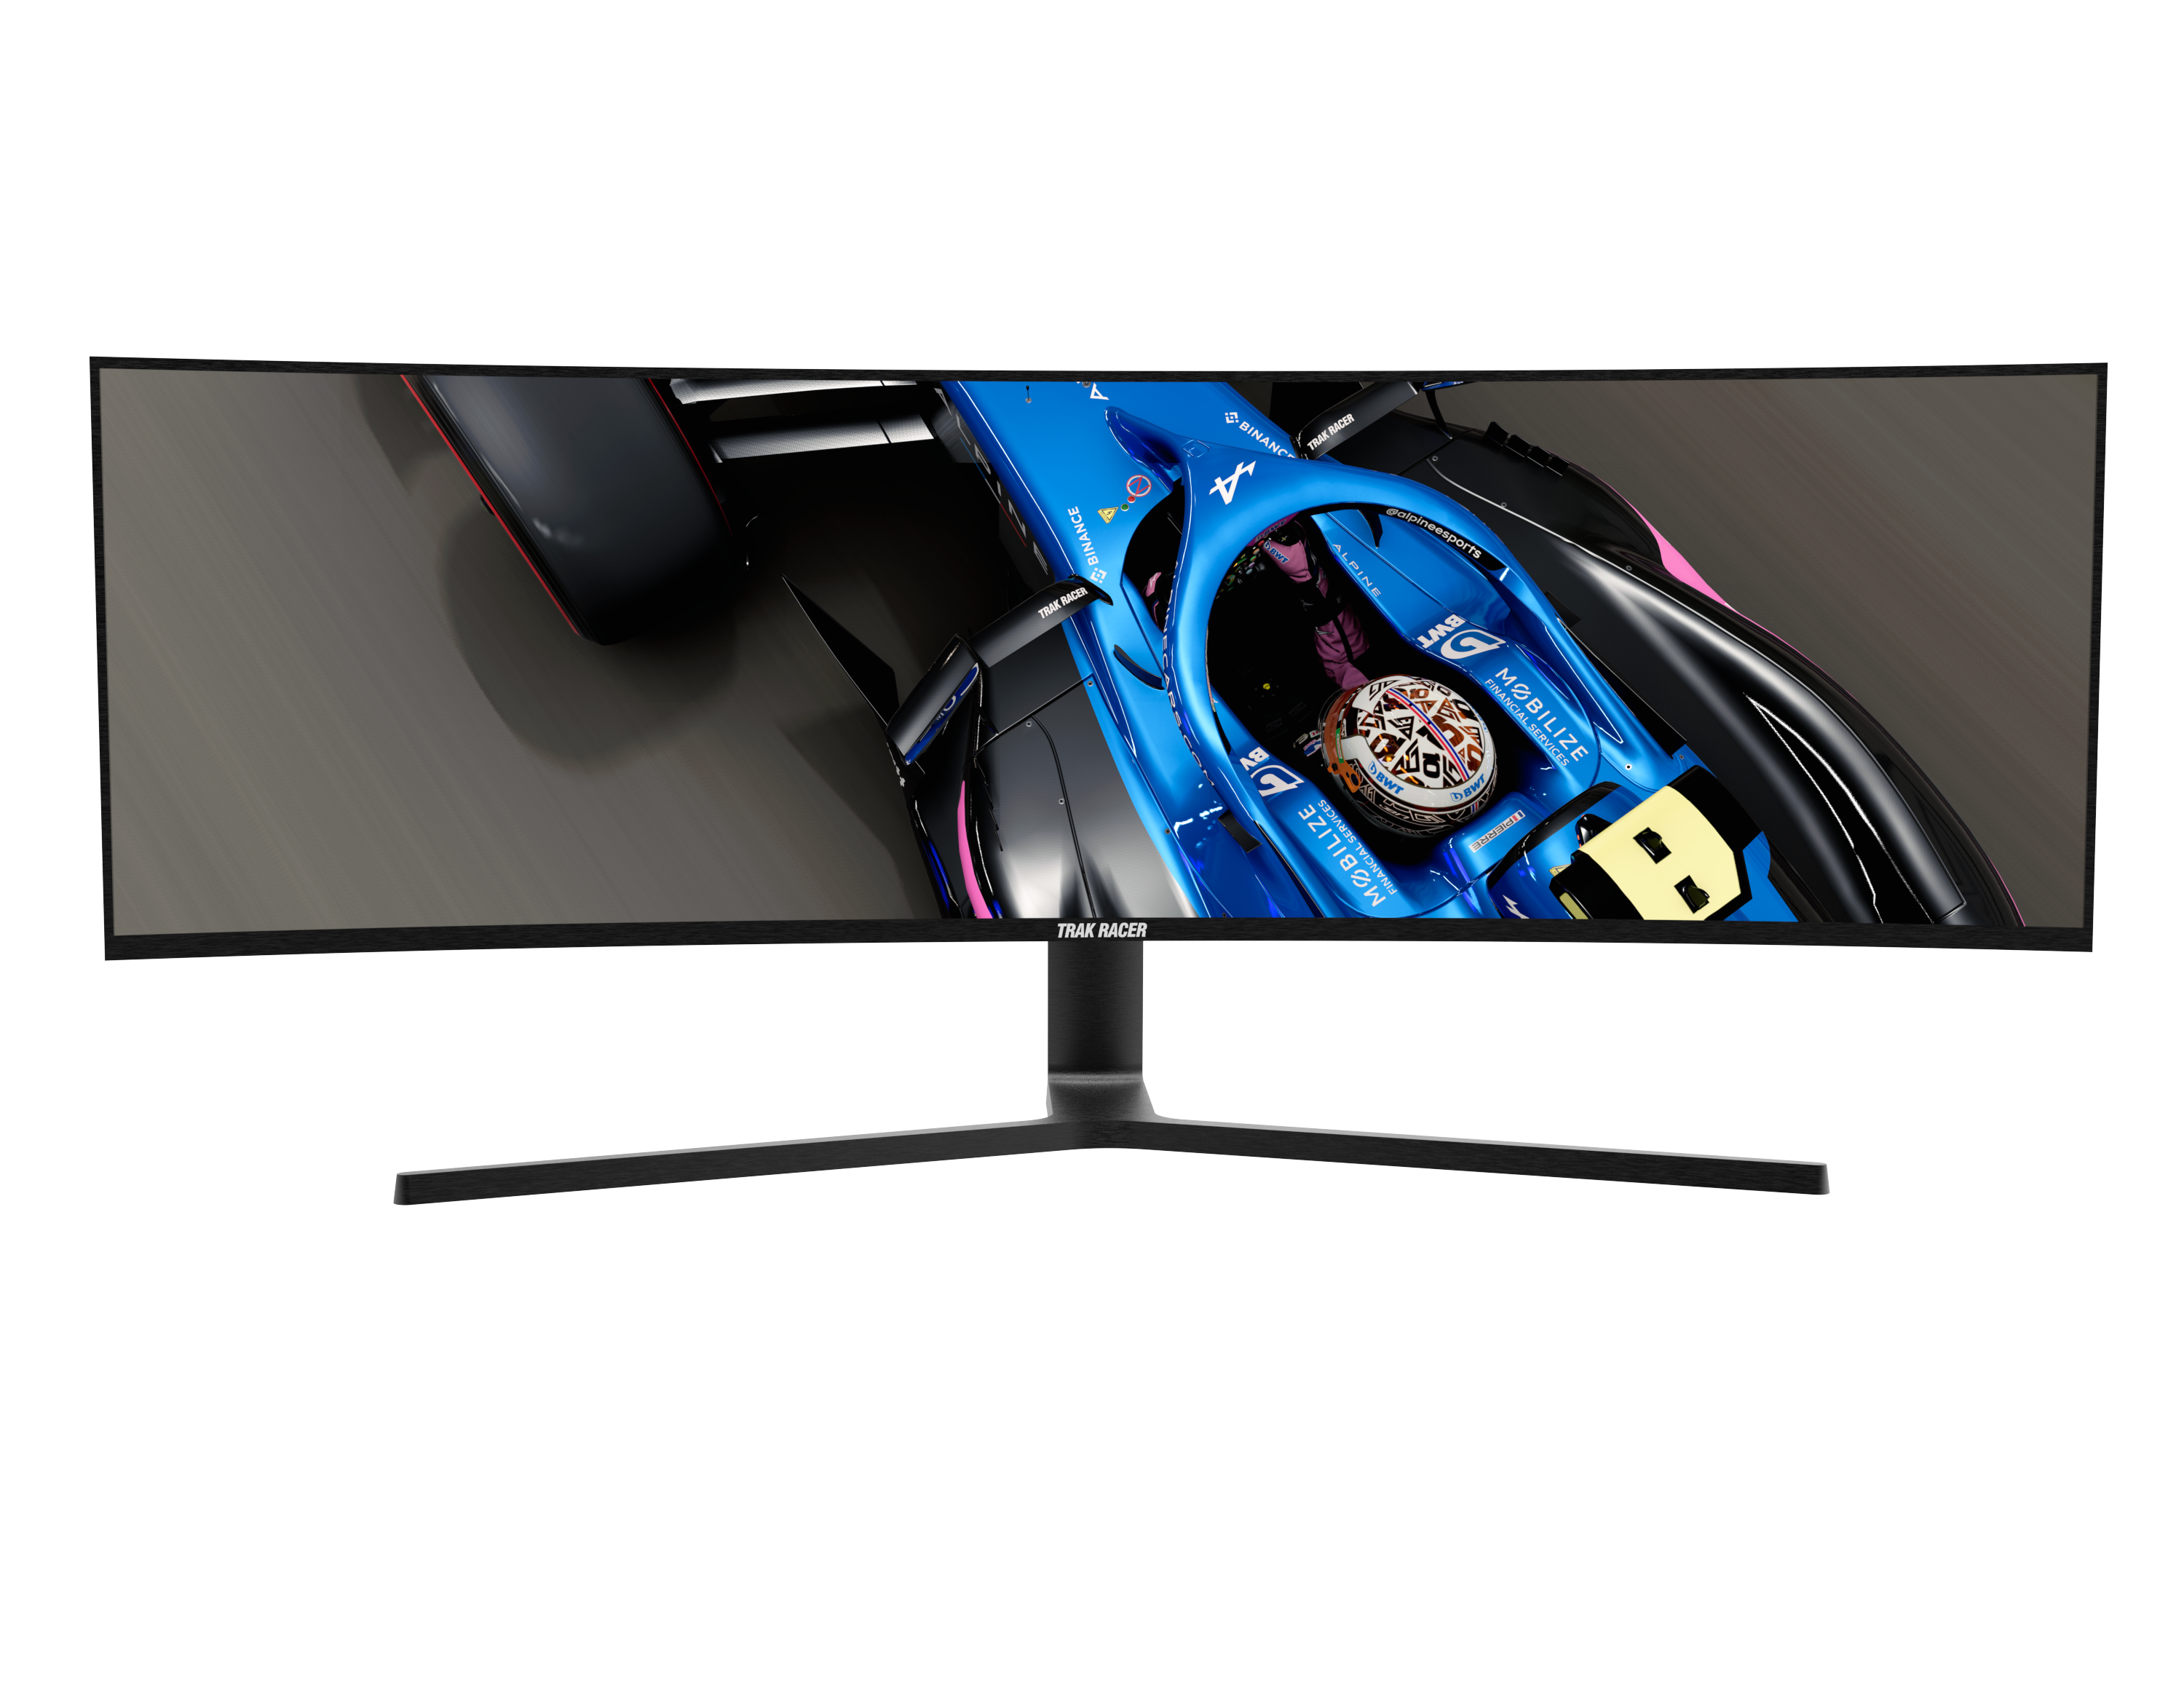 49" 144Hz DFHD Super Ultrawide Gaming Monitor